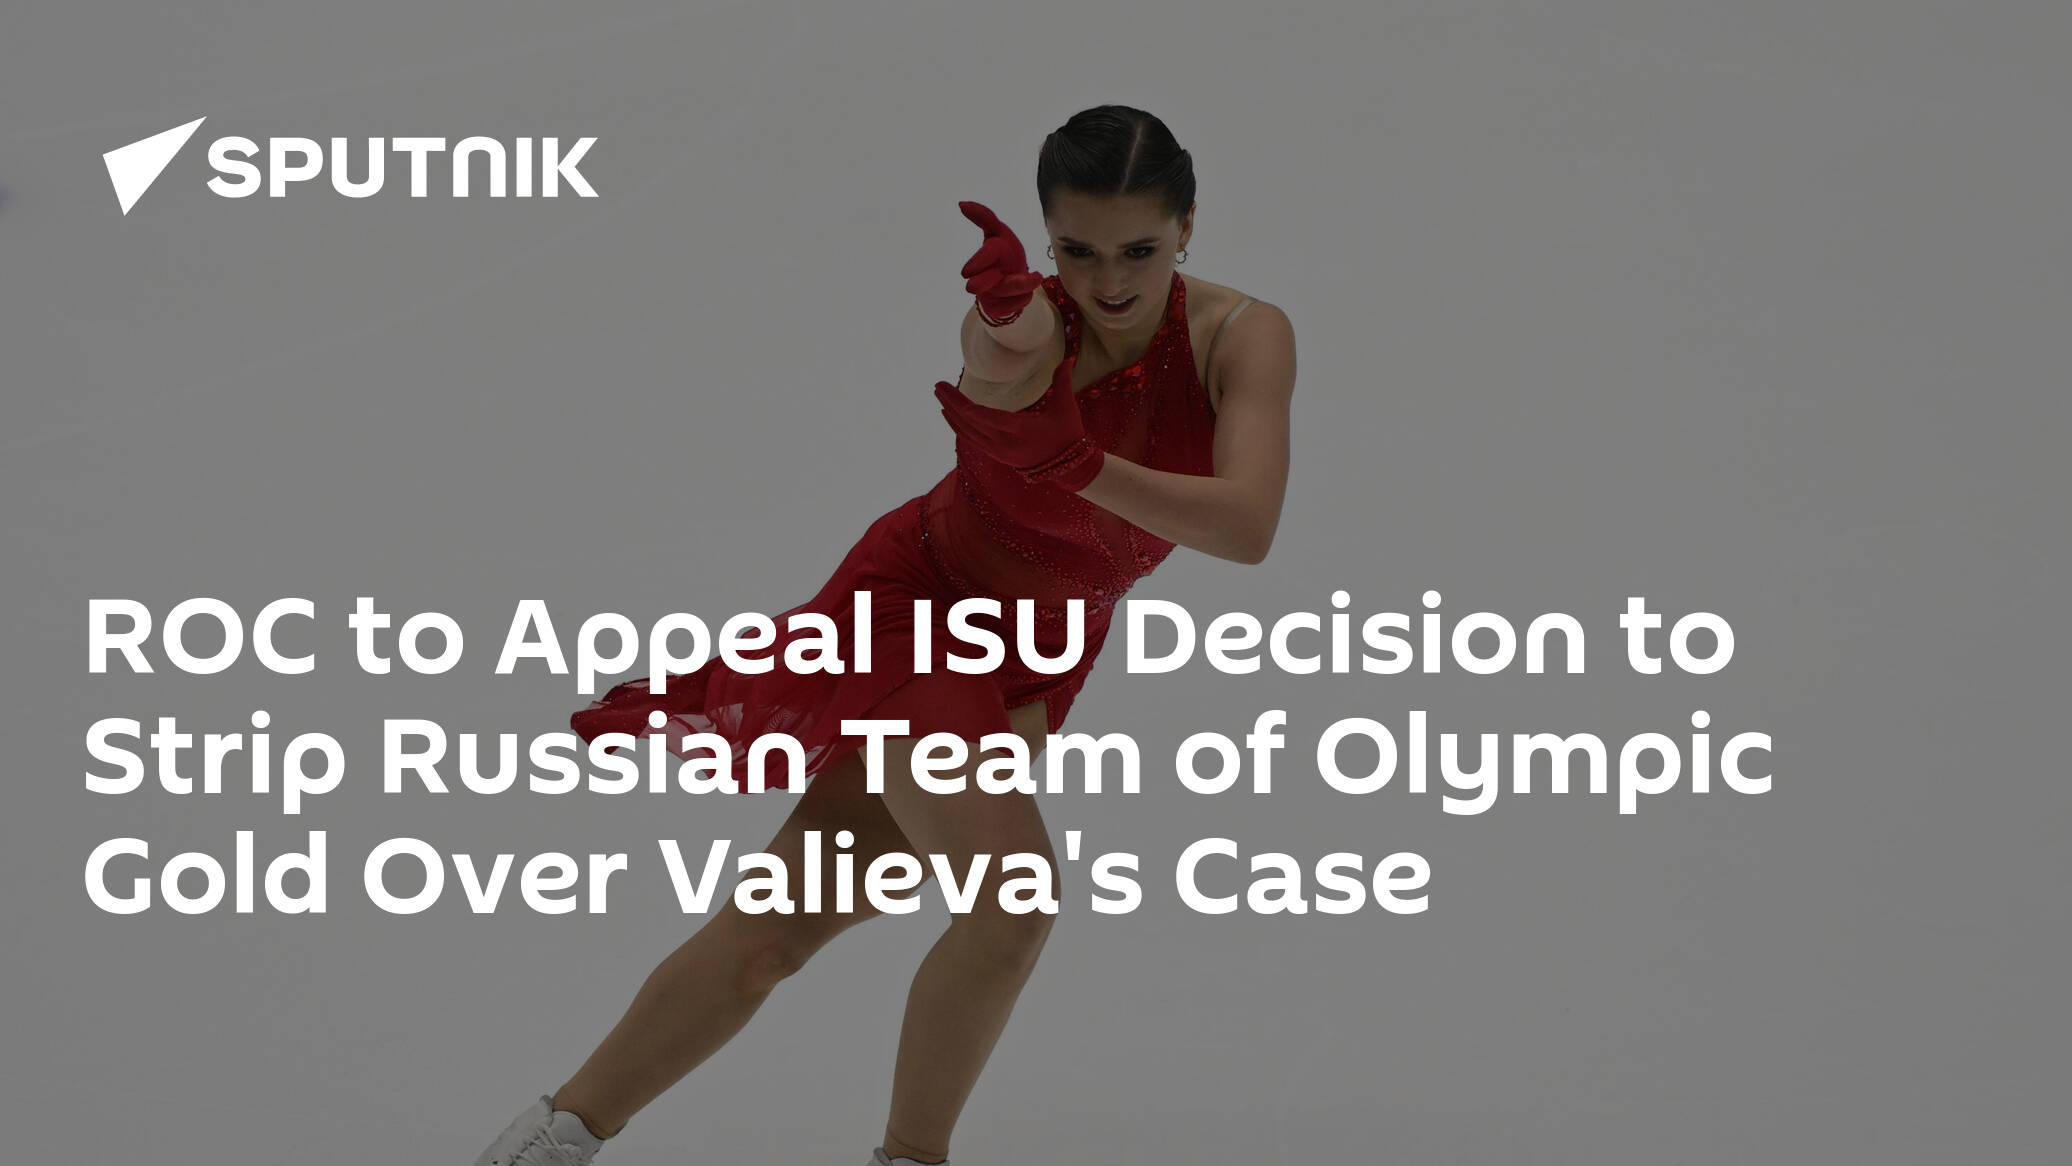 ROC to Appeal ISU Decision to Strip Russian Team of Olympic Gold Over Valieva's Case